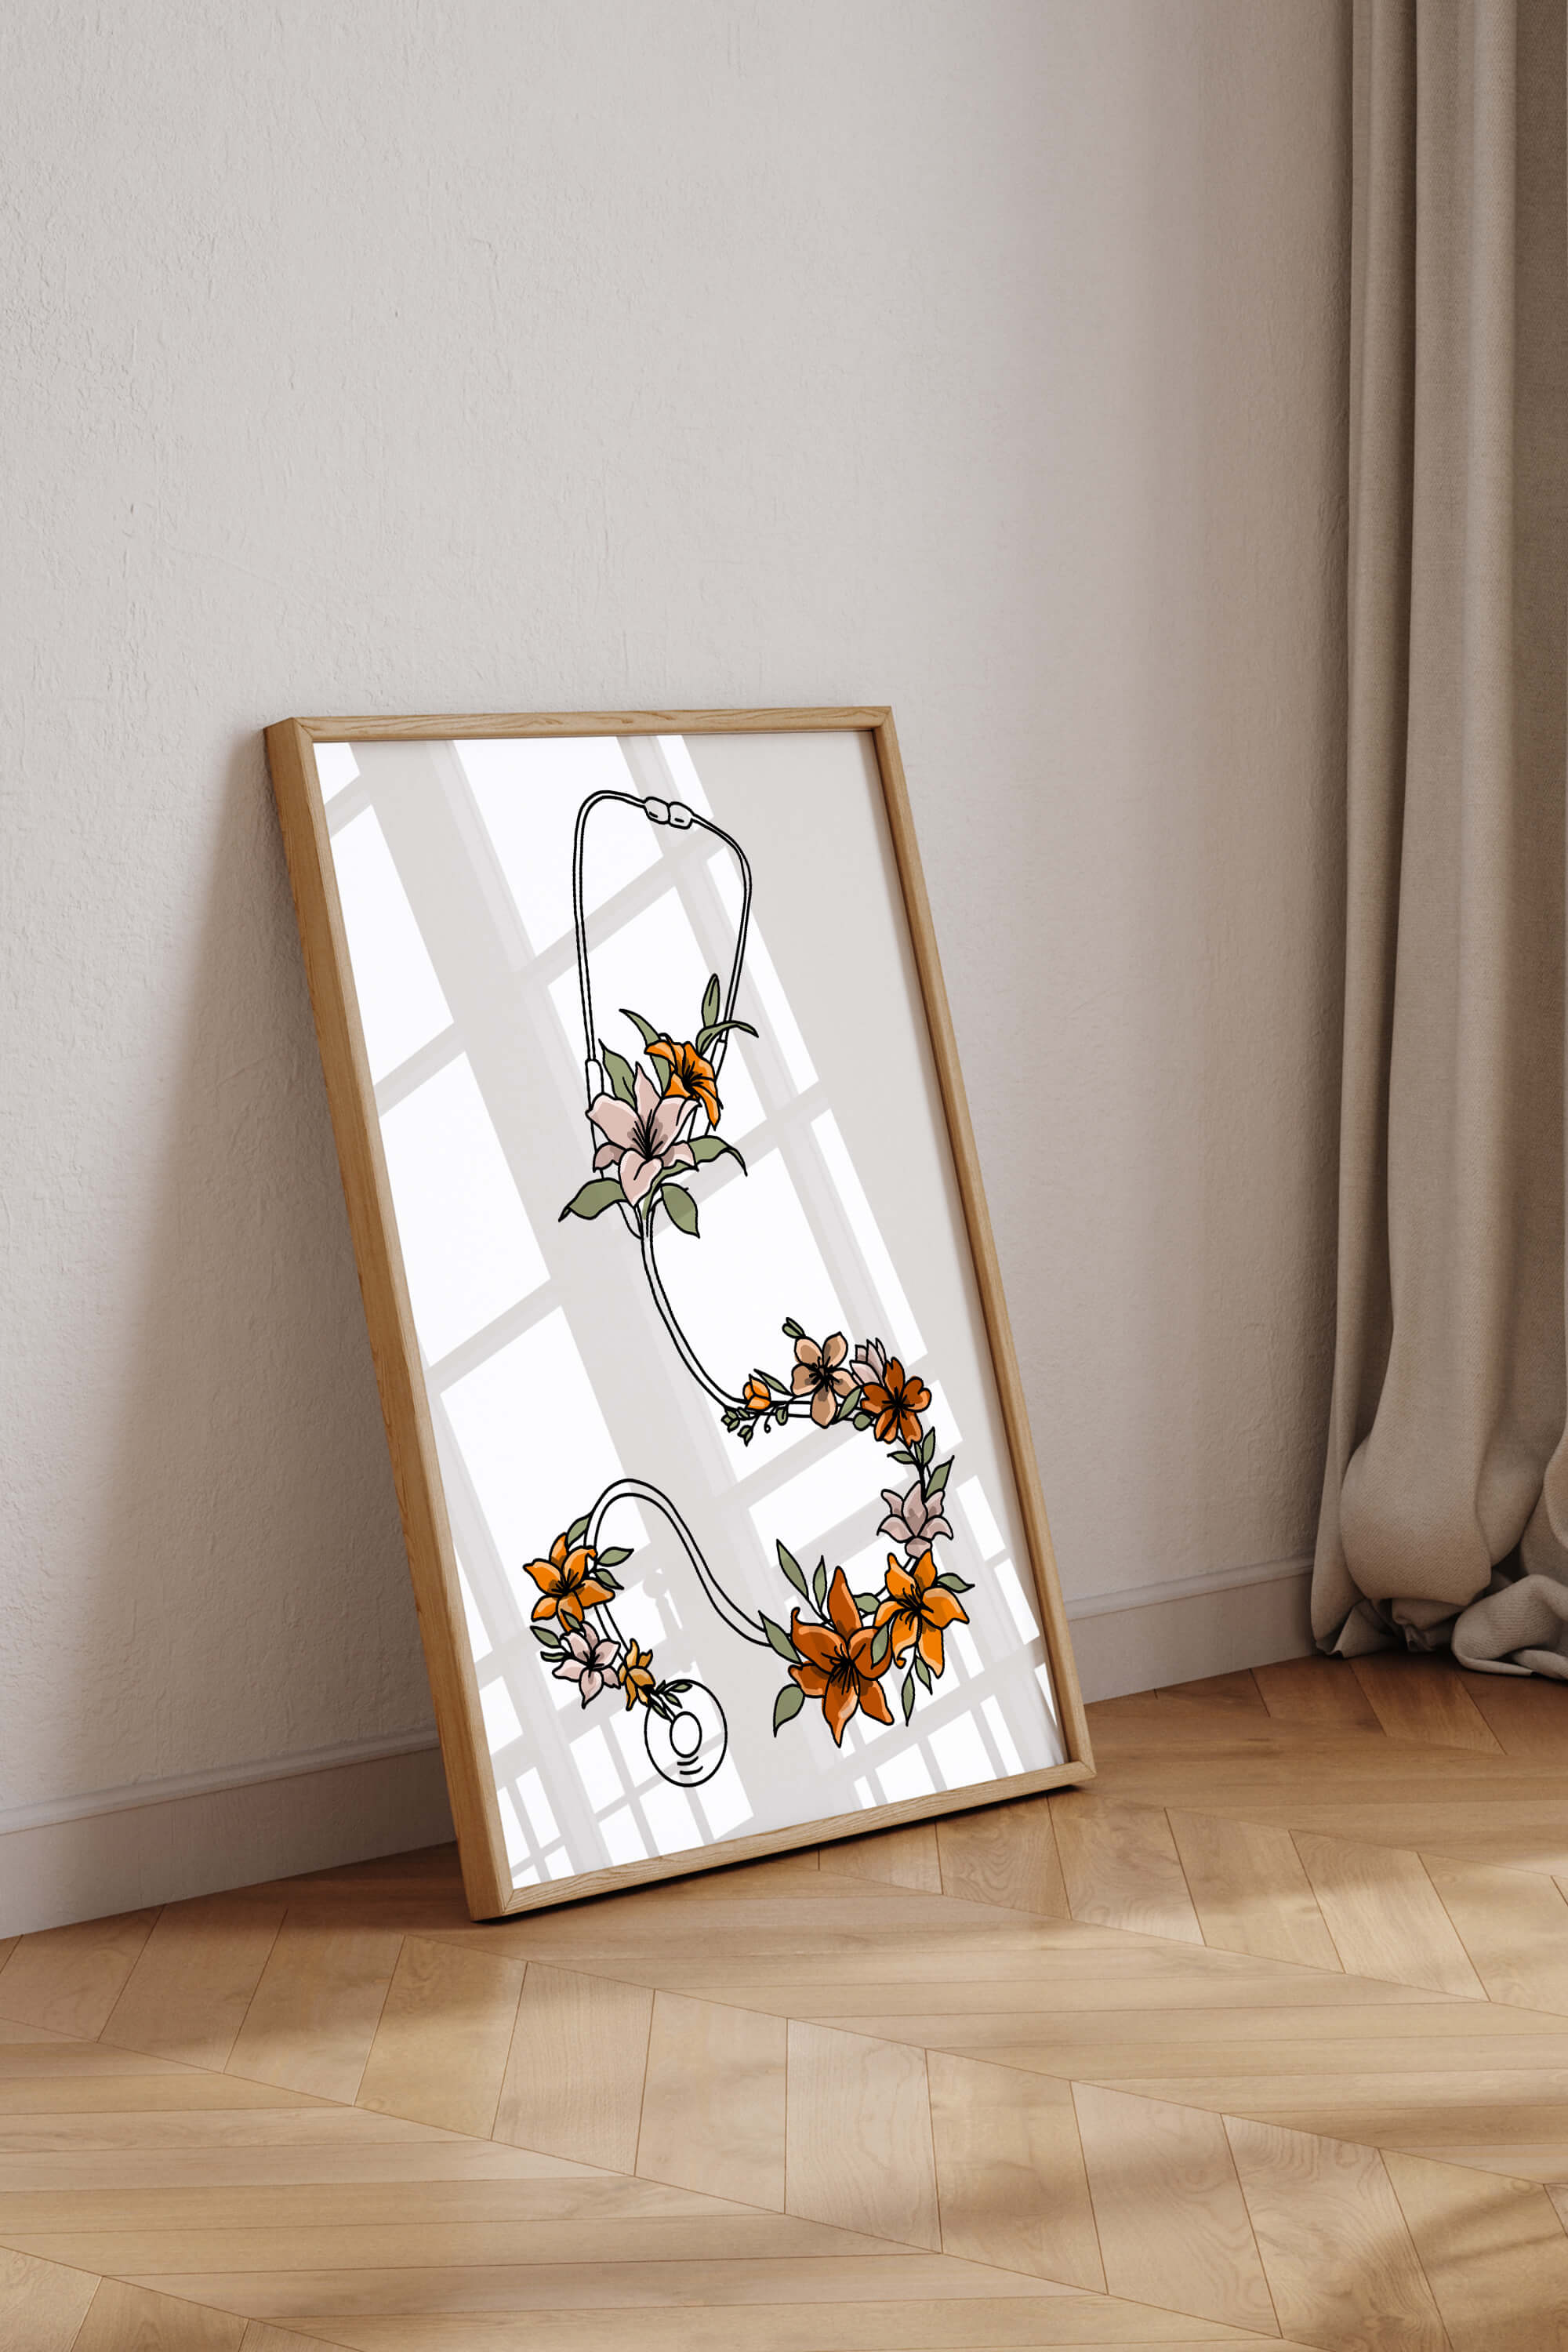 Unique wall decor for retired doctors, showcasing a stethoscope with floral accents, symbolizing a career in medicine.